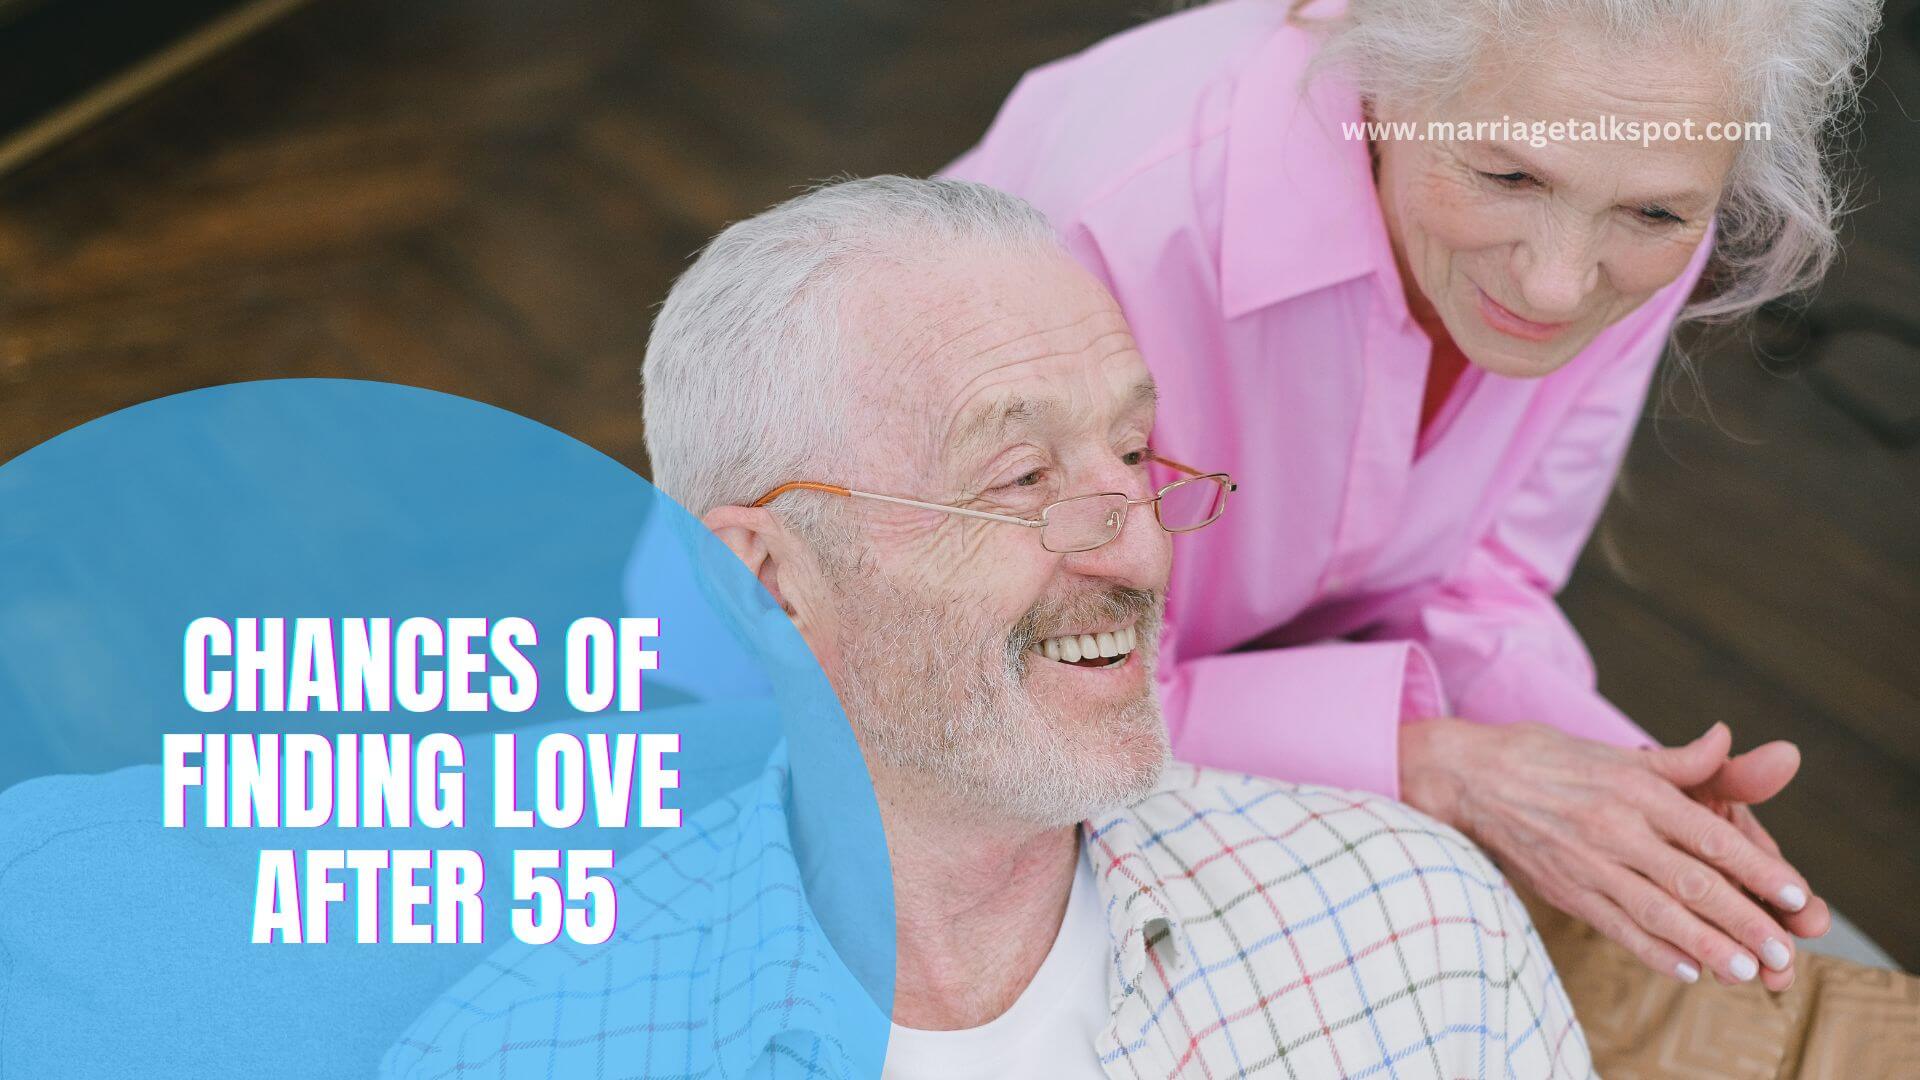 CHANCES OF FINDING LOVE AFTER 55